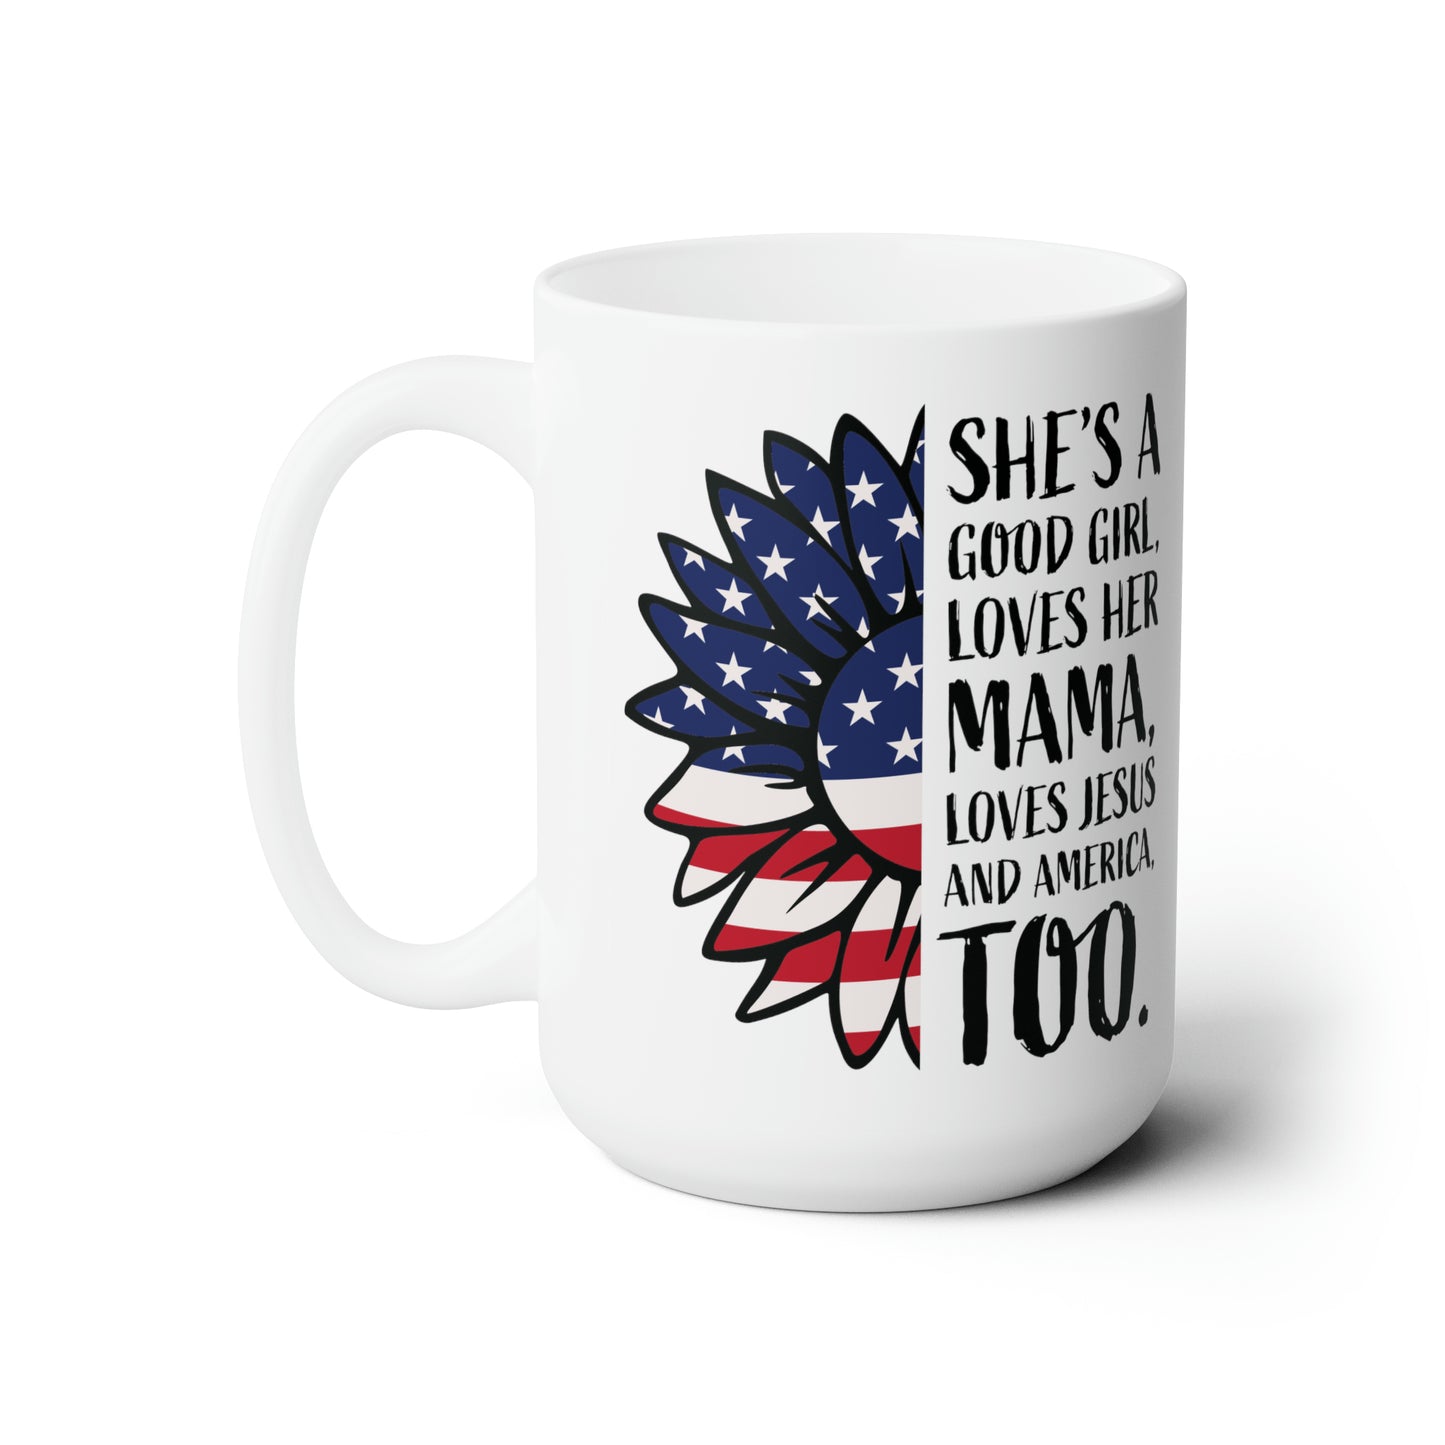 Good Girl Coffee Mug For Jesus Hot Tea Cup With Patriotic Quote